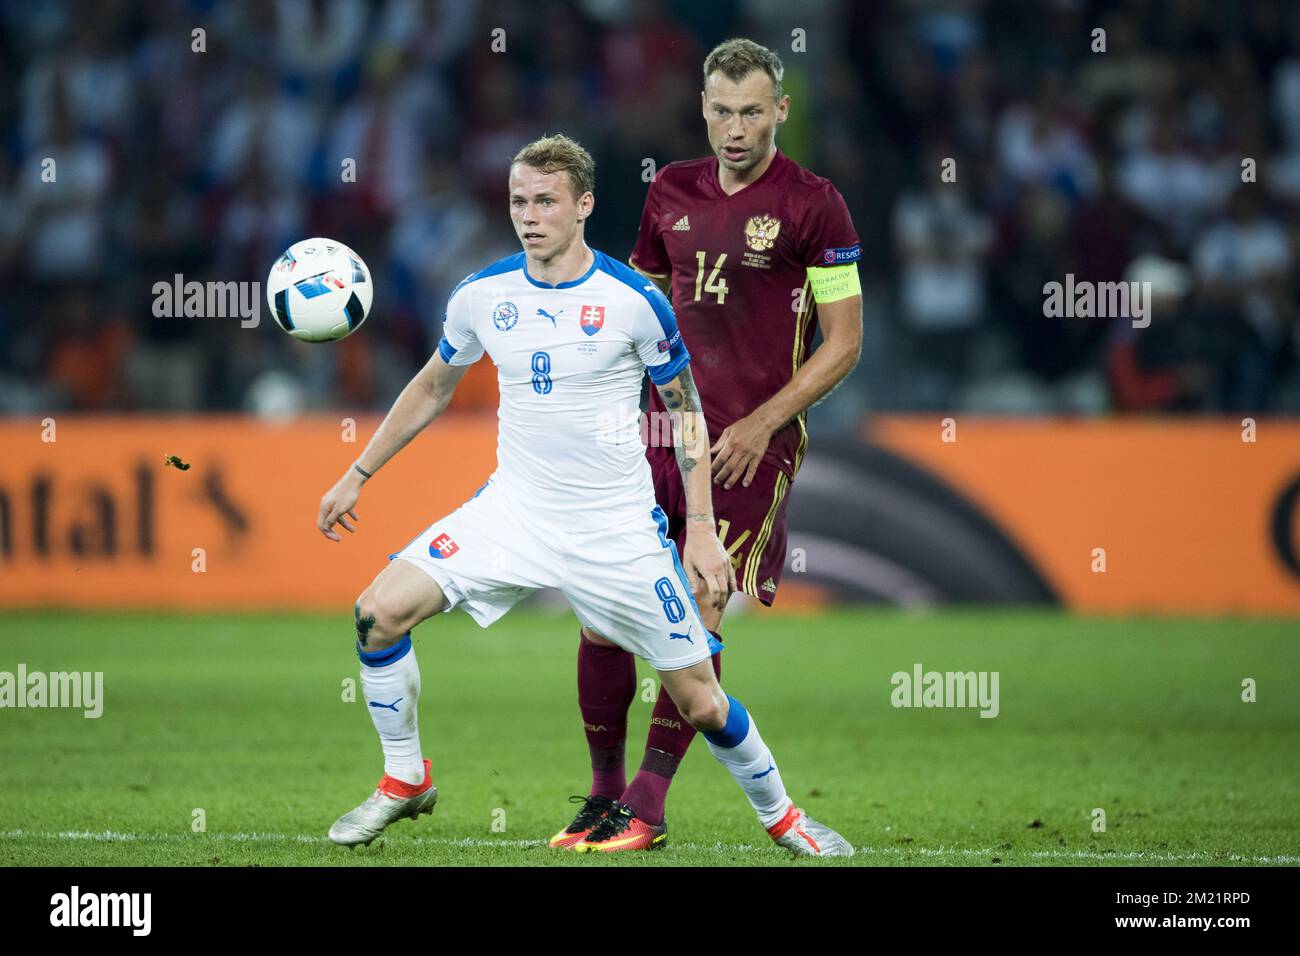 Ondrej Duda and Vasili Berezutski fights for the ball during a soccer game between Russian national soccer team Slovakia, in group B of the group stage of the UEFA Euro 2016 European Championships, Wednesday 15 June 2016 in Lille, France in Gent. Wednesday 15 June 2016  BELGA PHOTO JASPER JACOBS Stock Photo